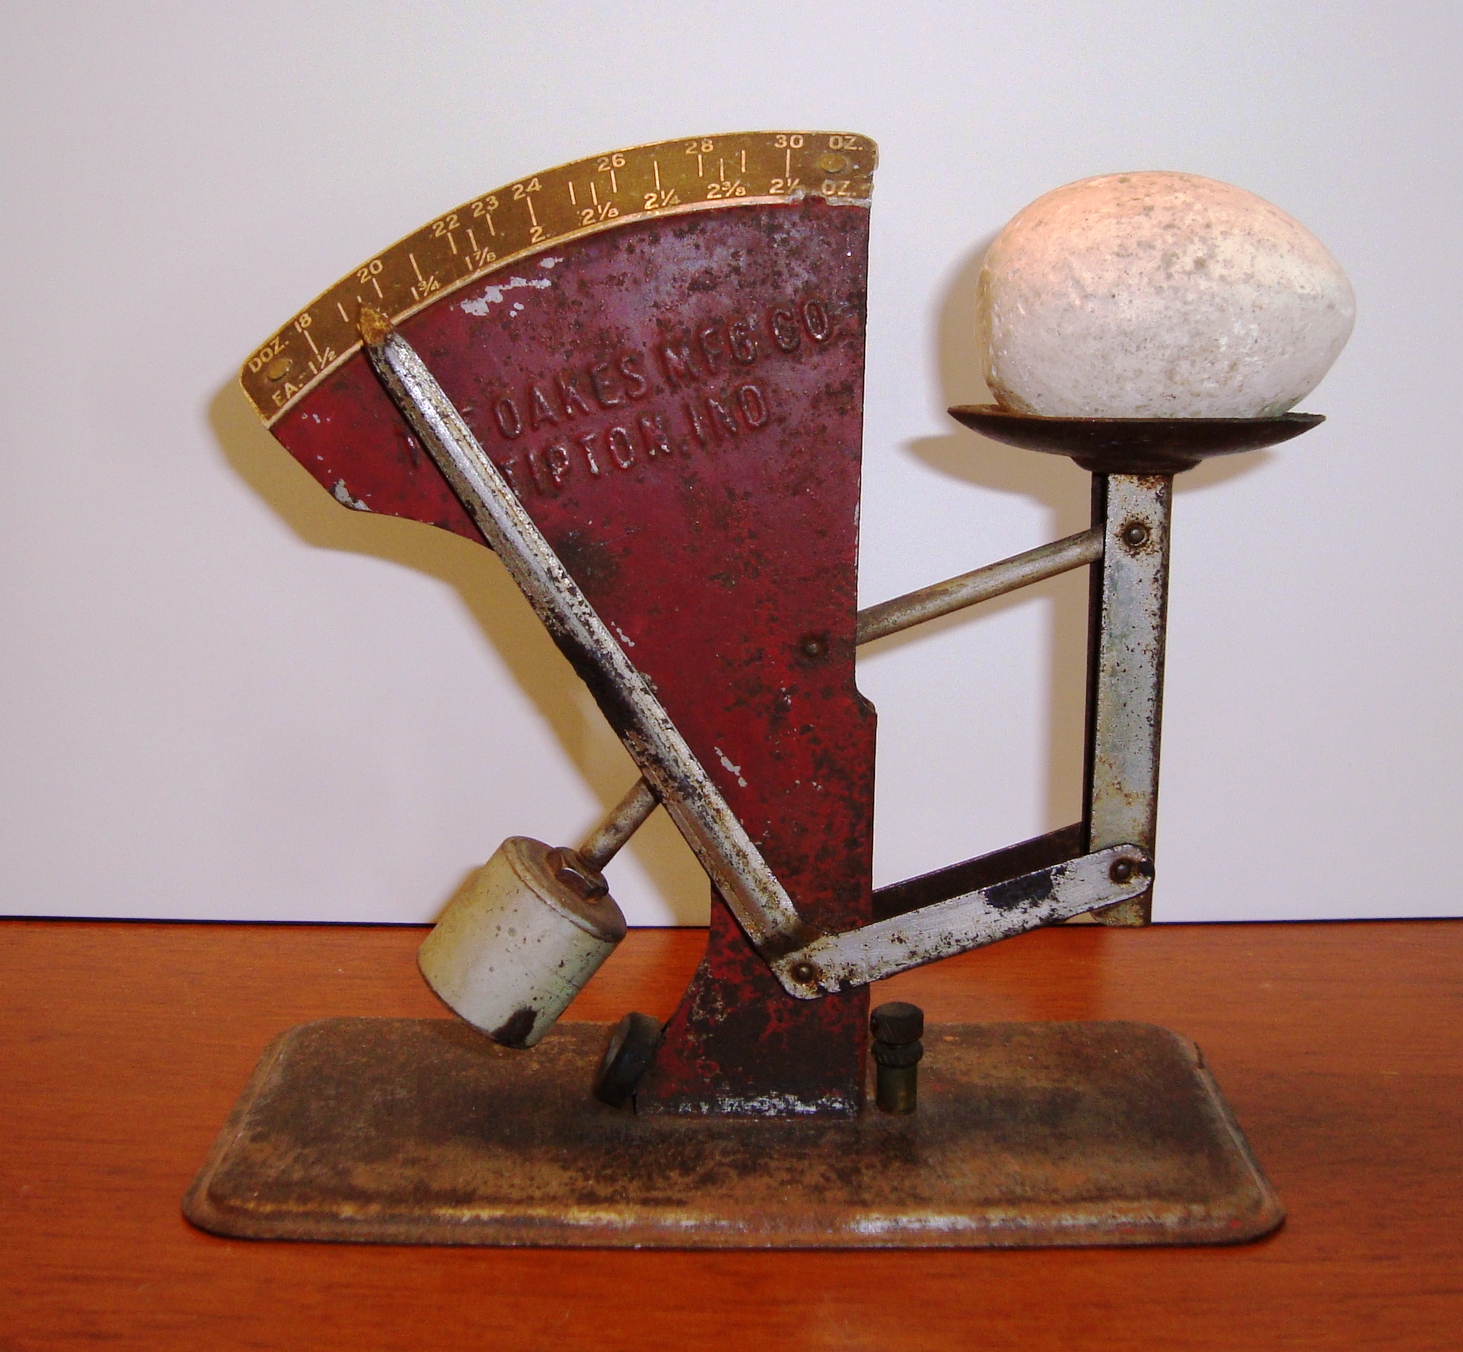 Egg scale, 1920s-30s